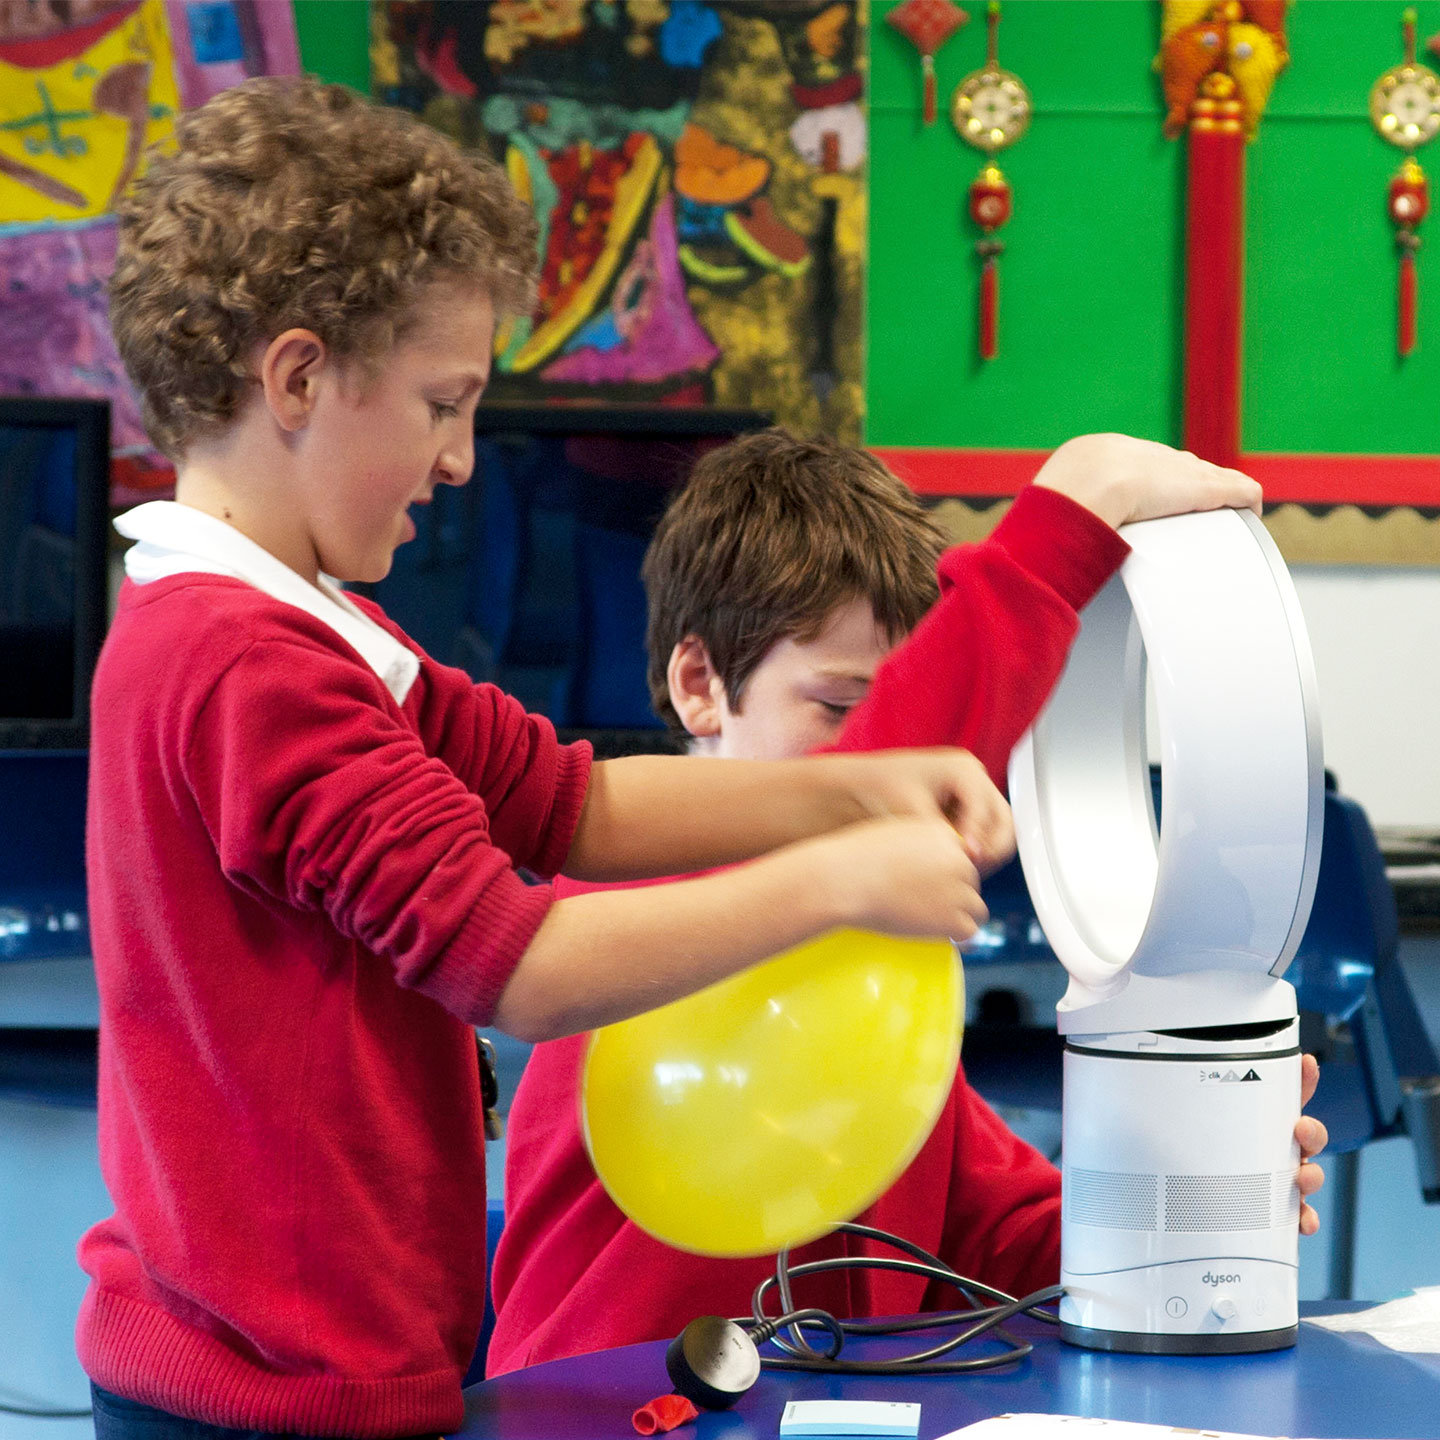 Primary school students taking part in a lesson from the Design Process Box using the Dyson Air Multiplier fan.